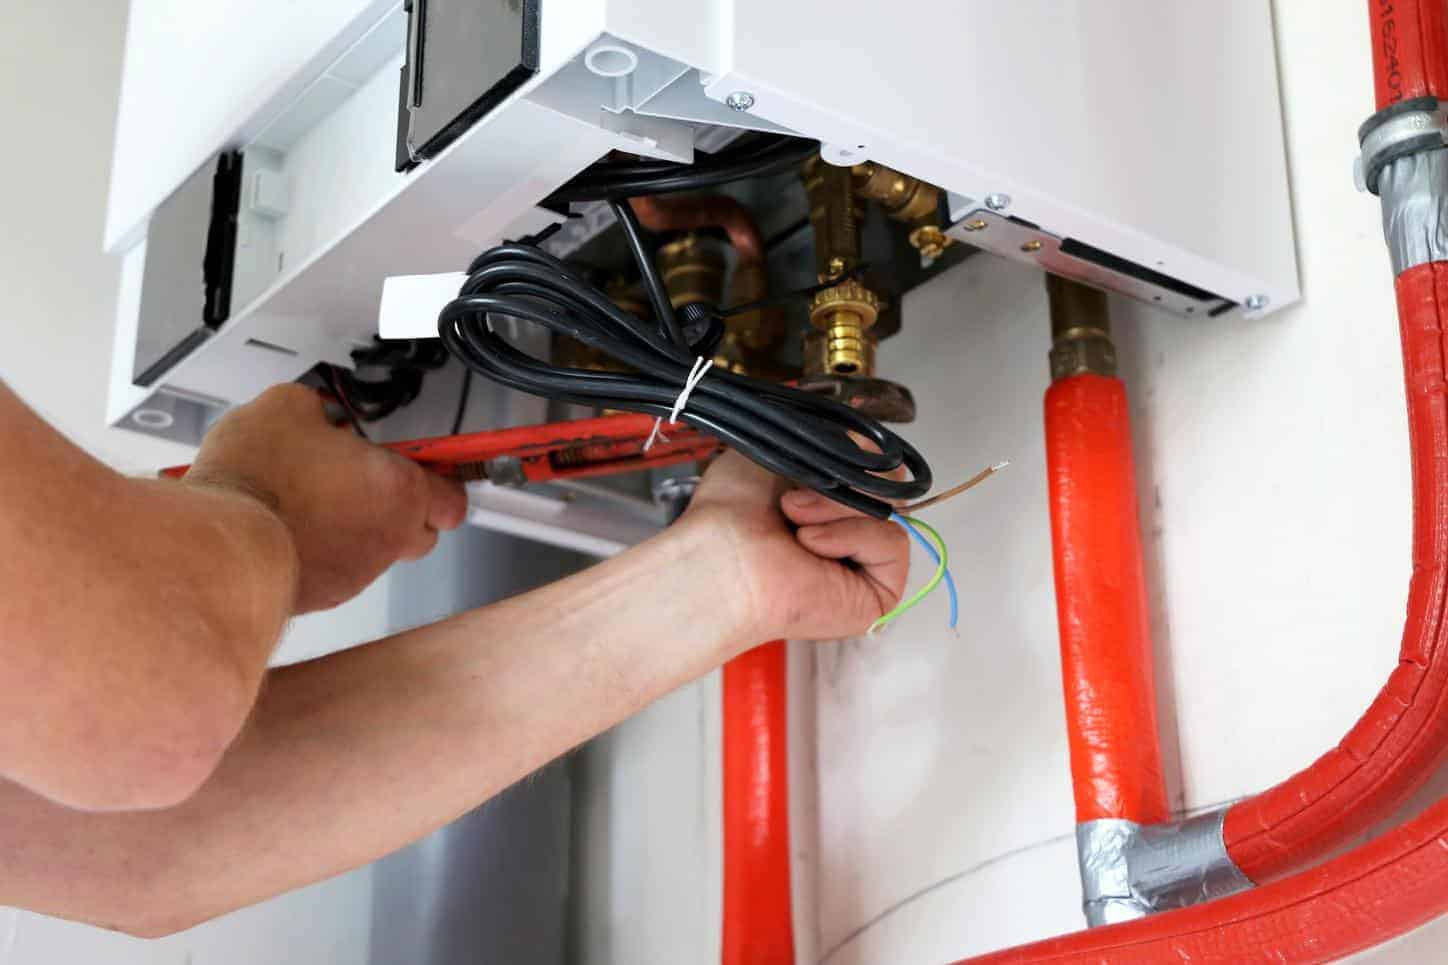 boiler services and maintenance in richmond upon thames